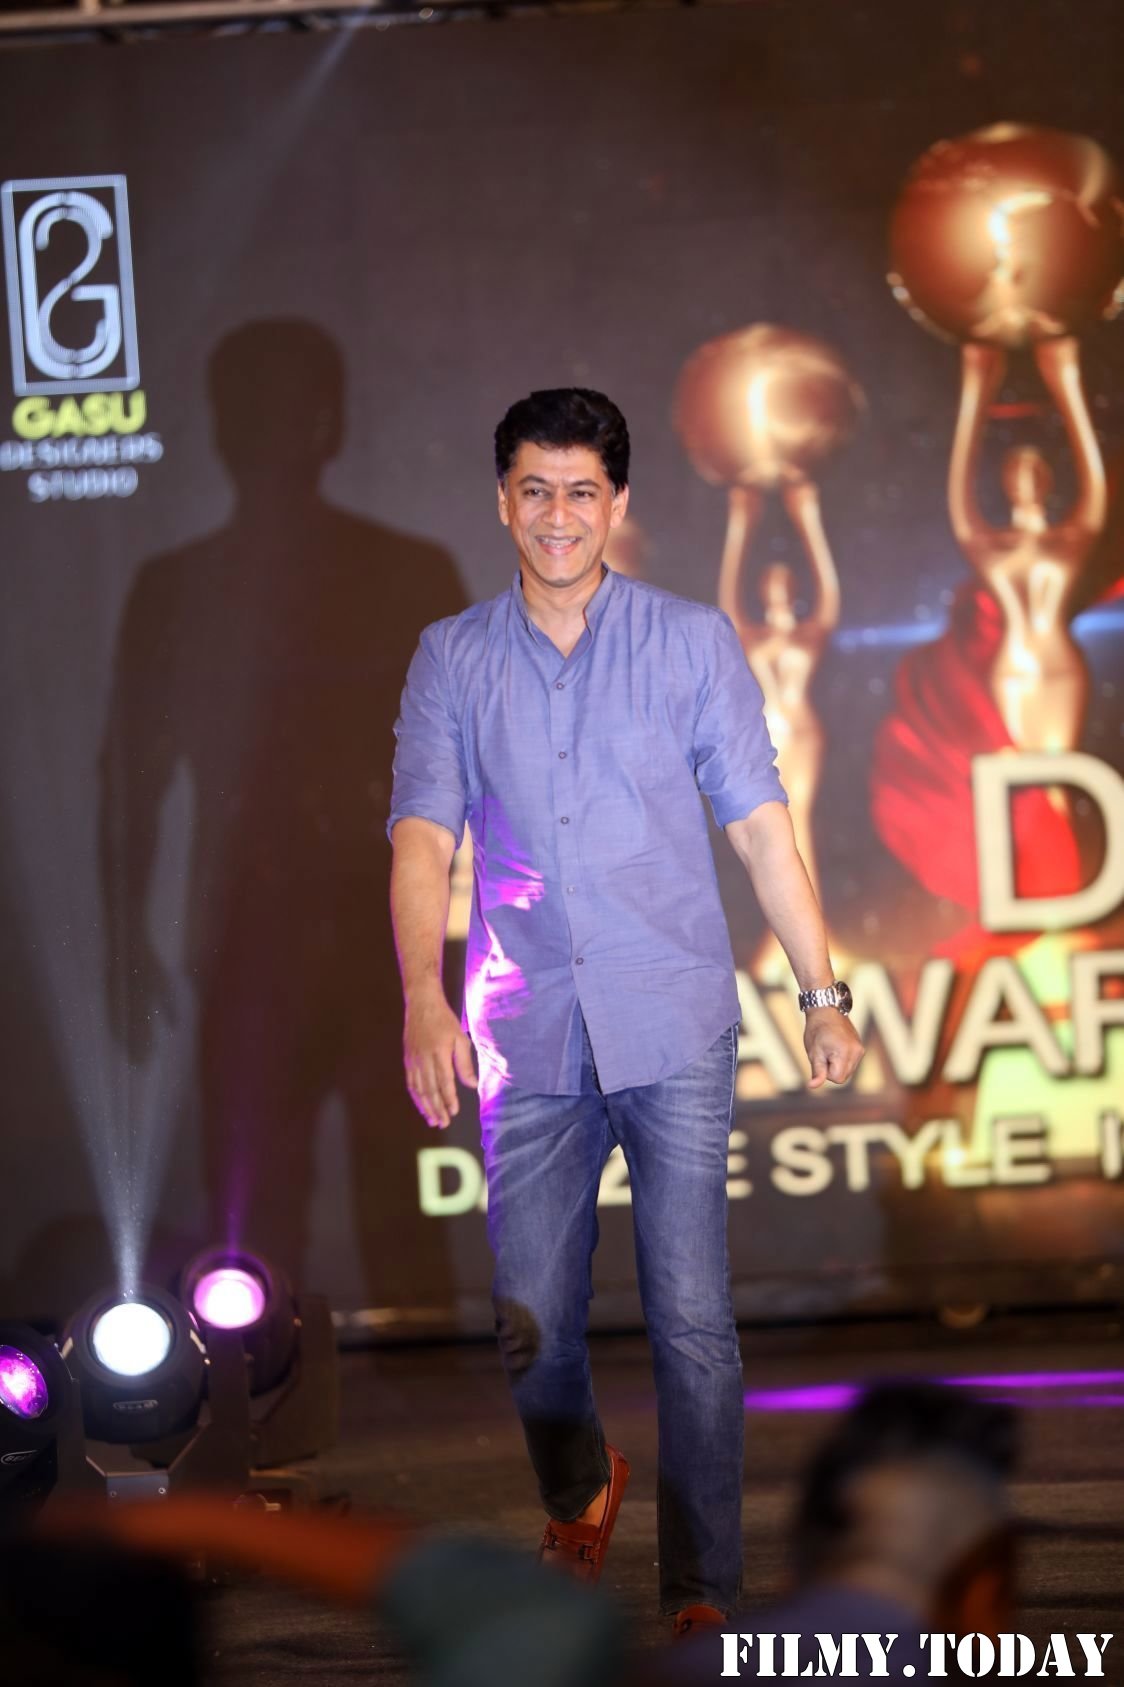 D Awards And Dazzle Style Icon Awards 2019 Photos | Picture 1692913